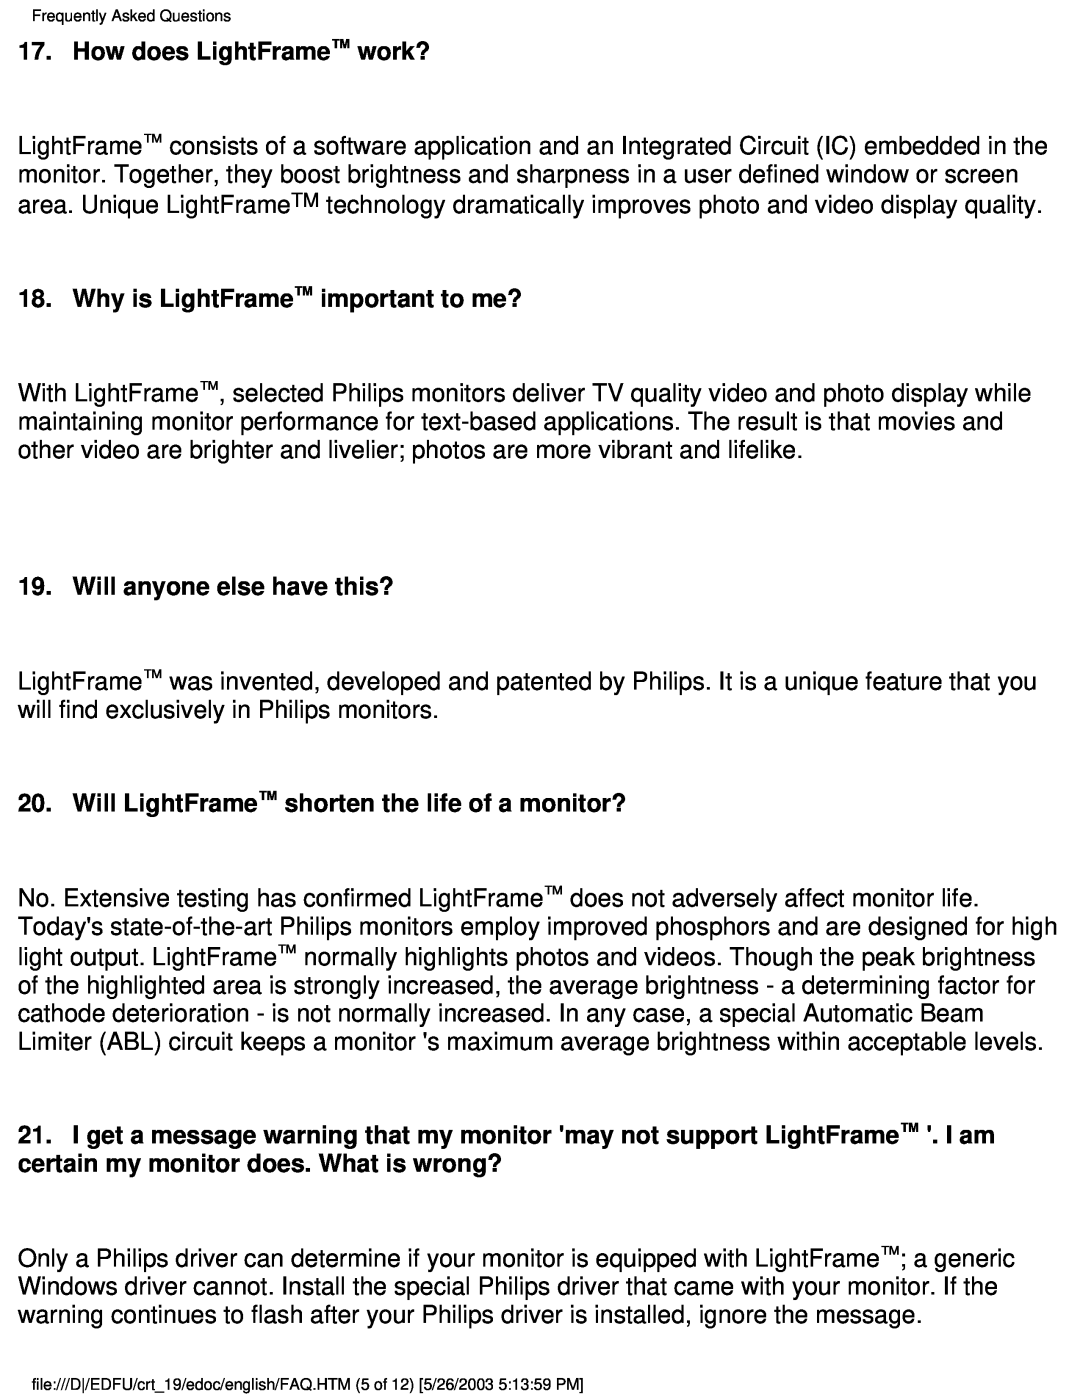 Philips 109E5 user manual How does LightFrame work?, Why is LightFrame important to me?, Will anyone else have this? 